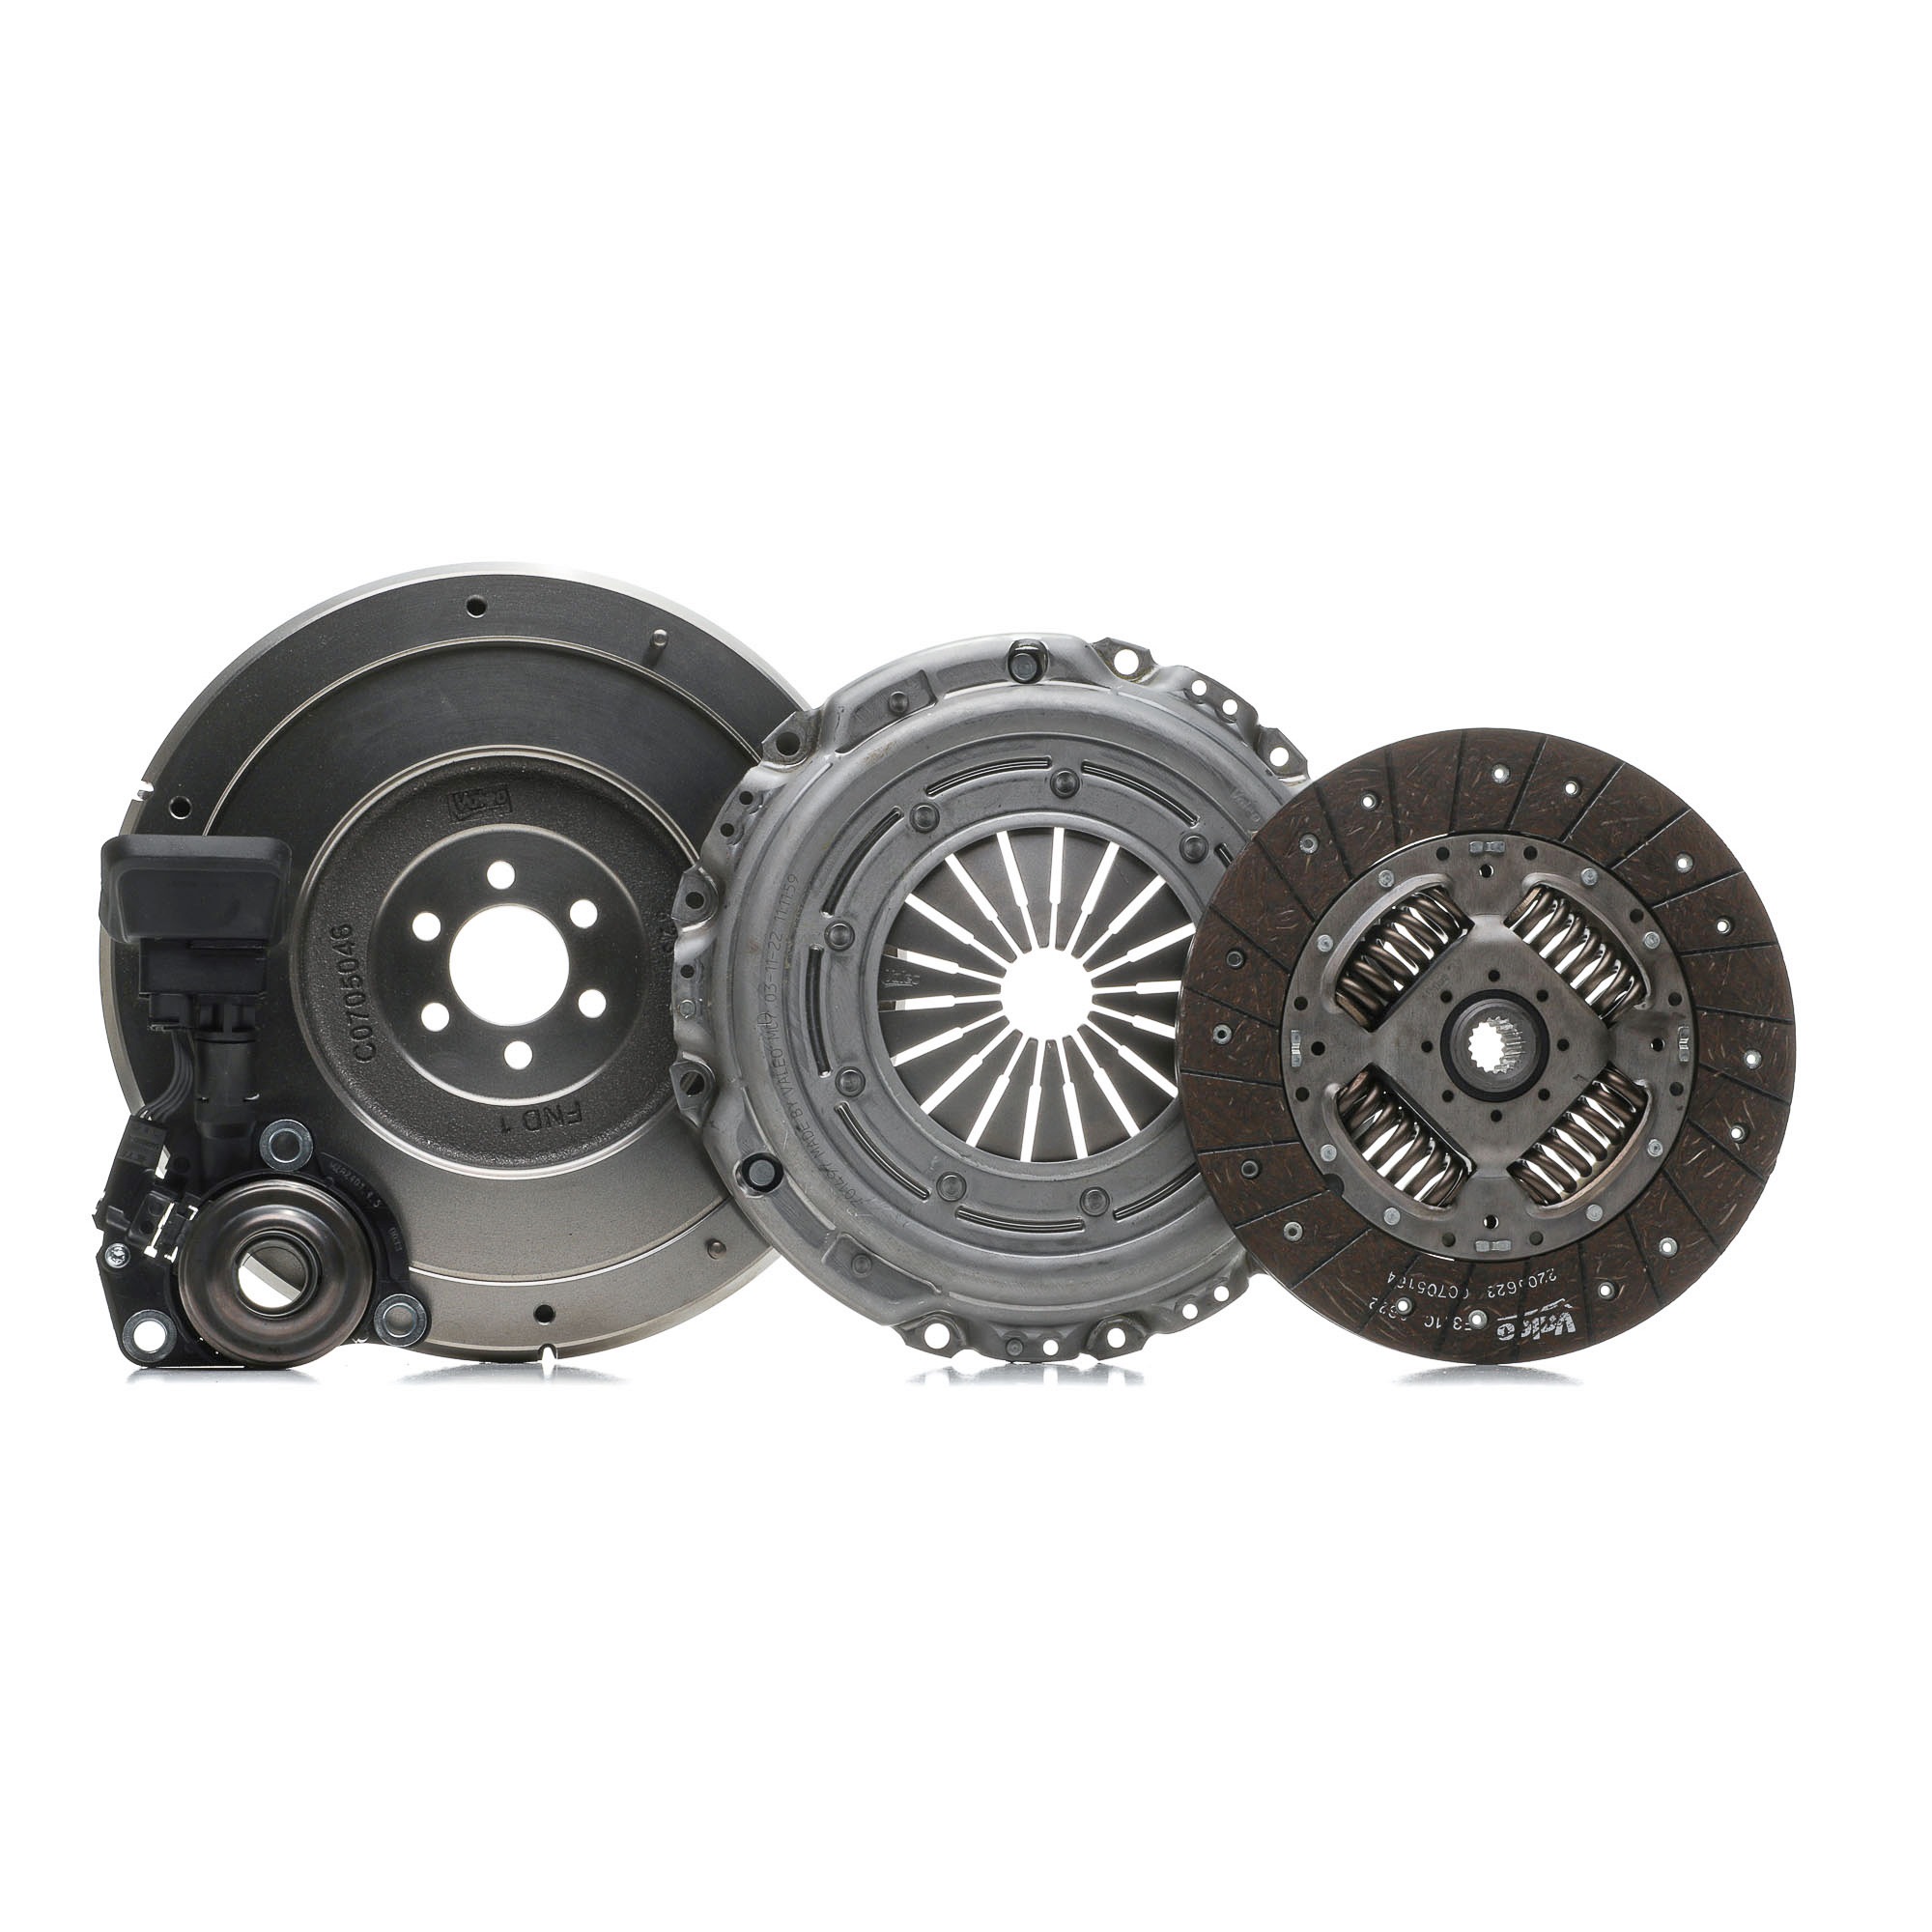 VALEO 845180 Clutch kit with single-mass flywheel, with central slave cylinder, 228mm